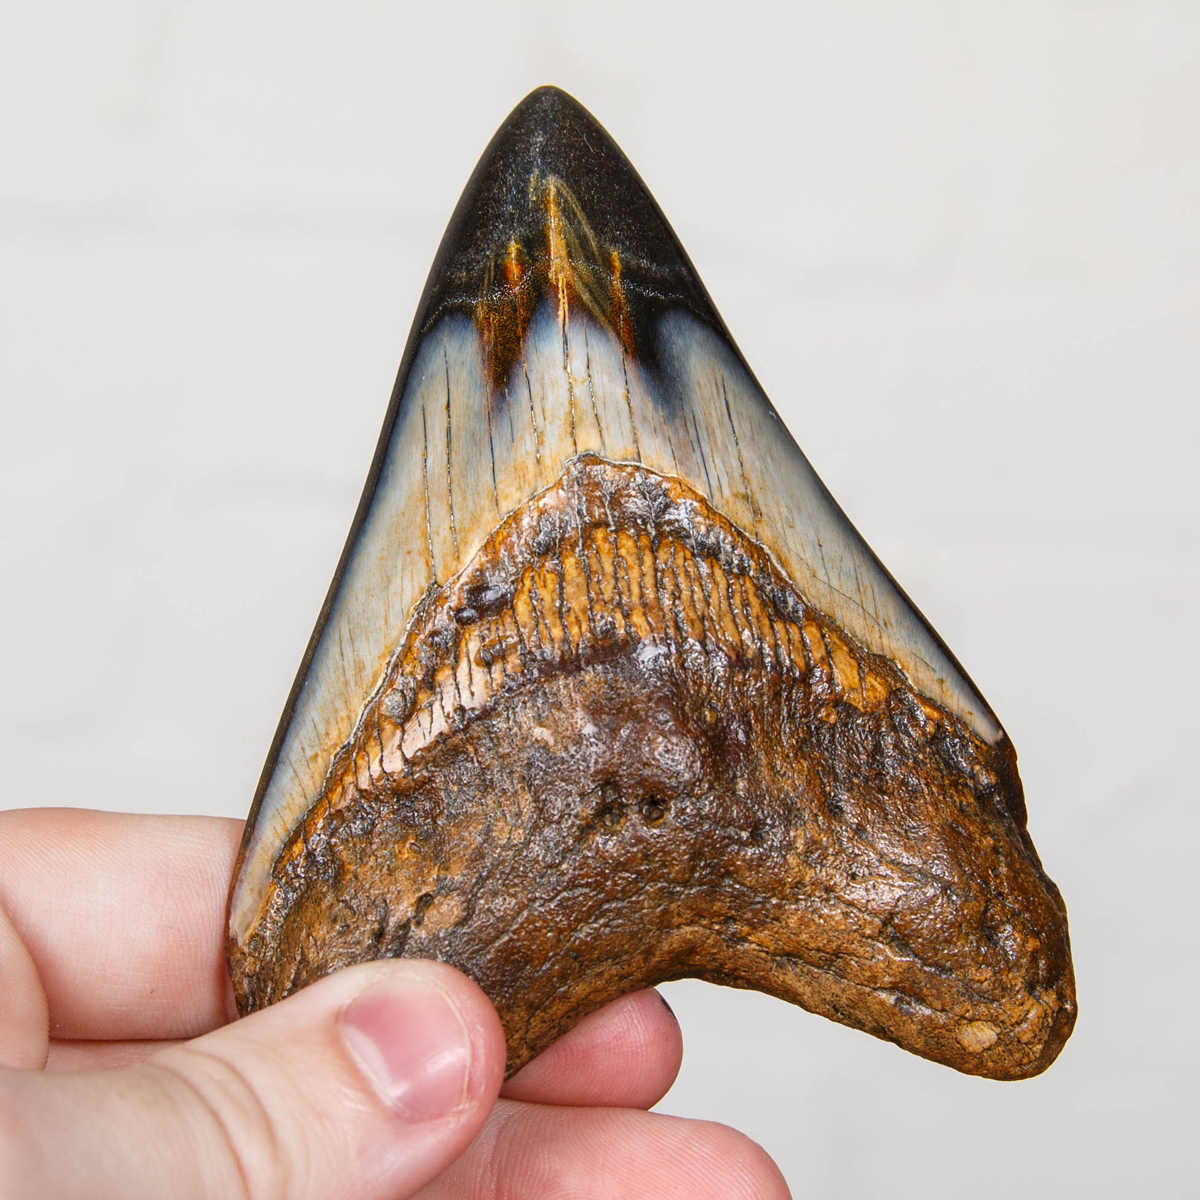 Collector Grade  3.9 Inch Polished Megalodon Shark Tooth Fossil on Stand (Carcharodon megalodon)